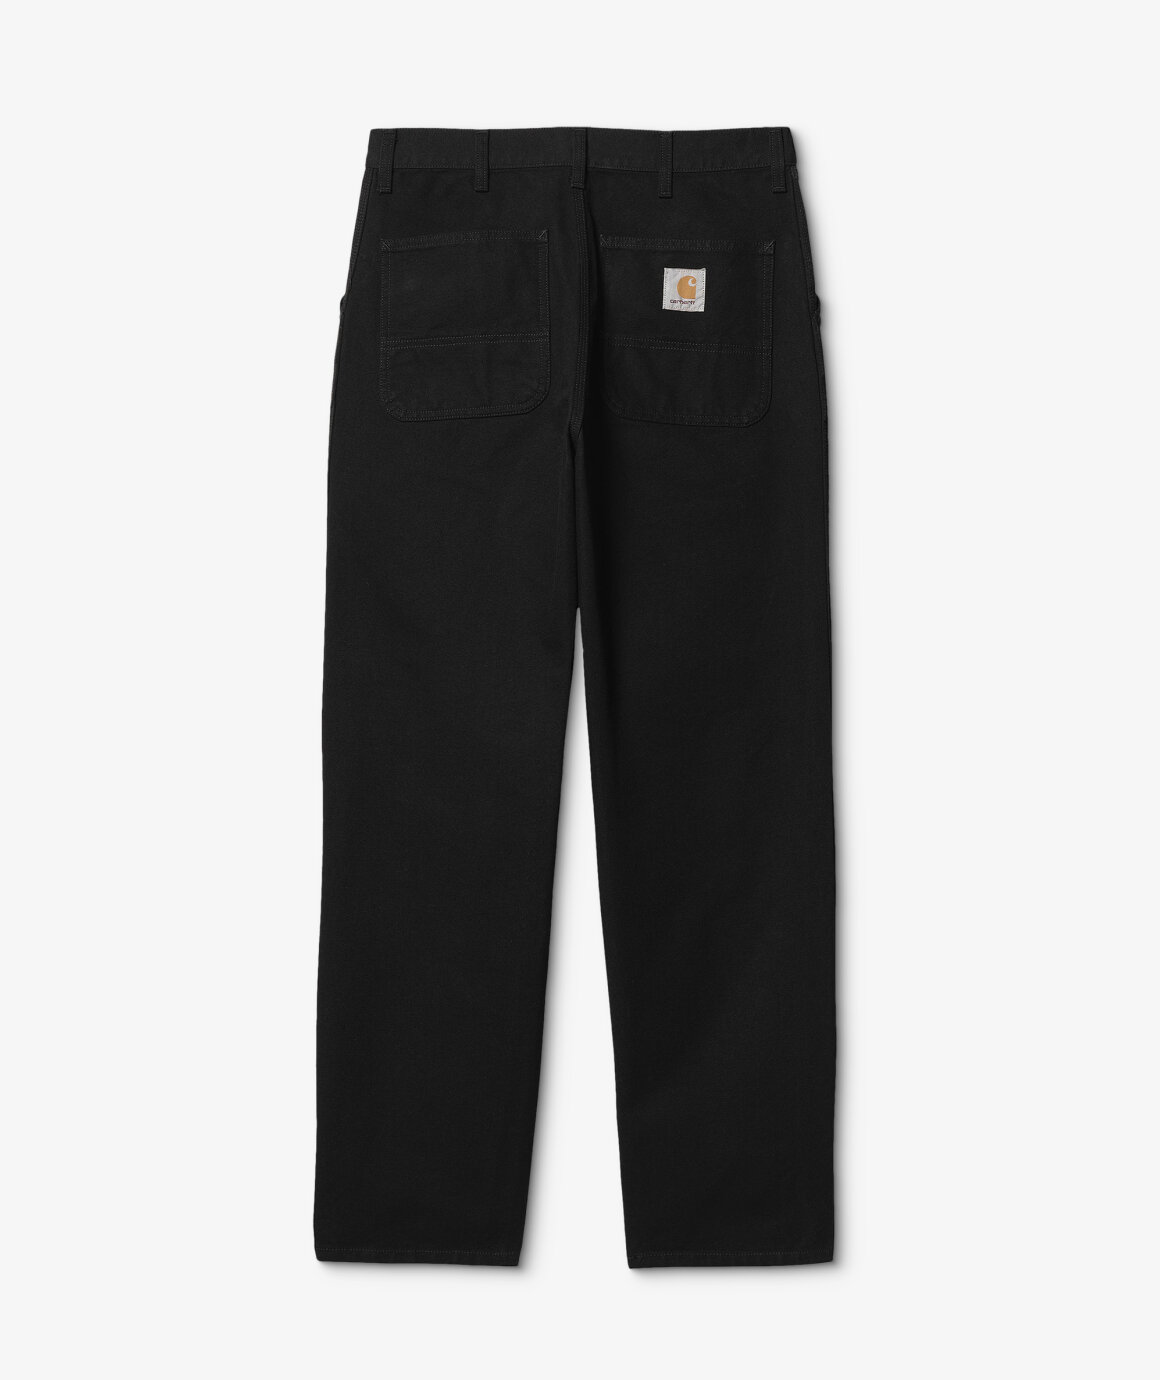 Norse Store | Shipping Worldwide - Carhartt WIP Simple Pant - Black Rinsed